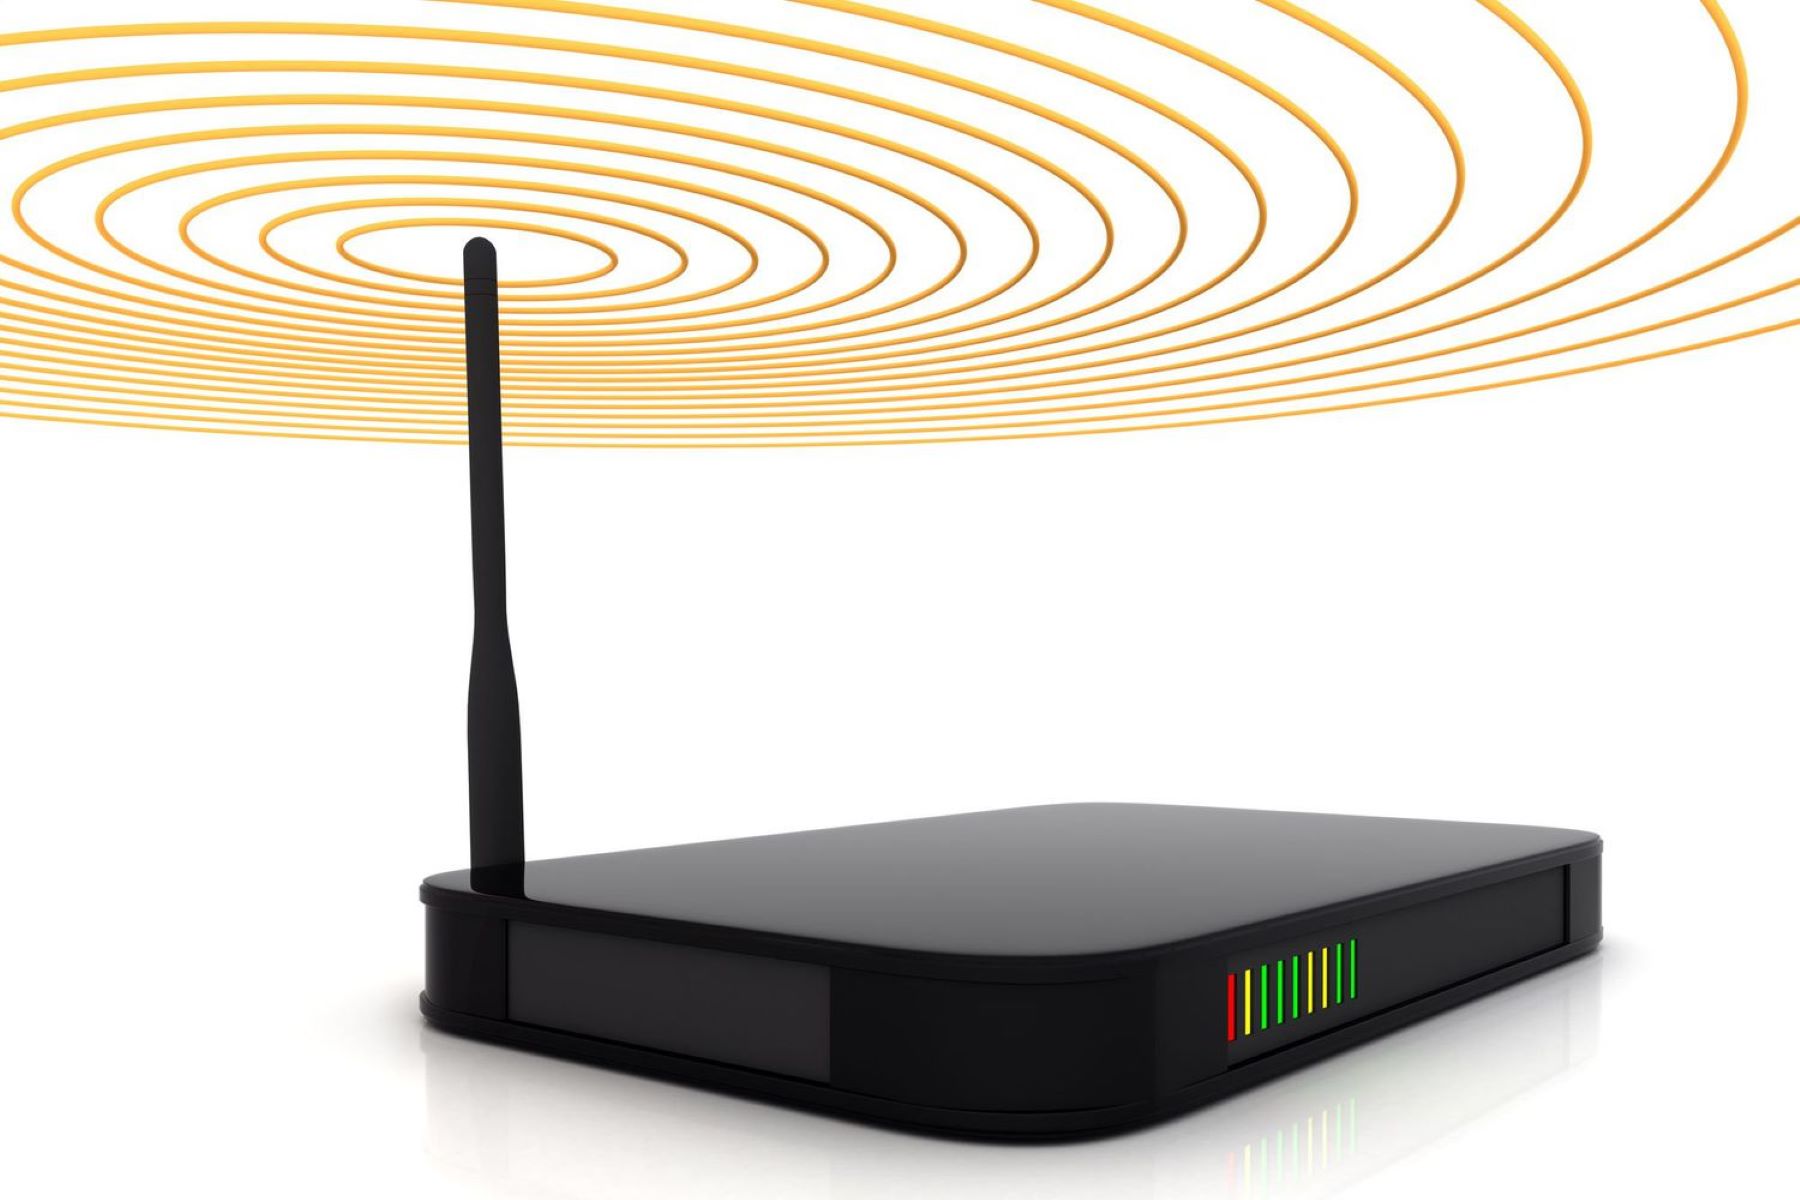 Get Better Wi-Fi: Here’s The Best Place For Your Wireless Router